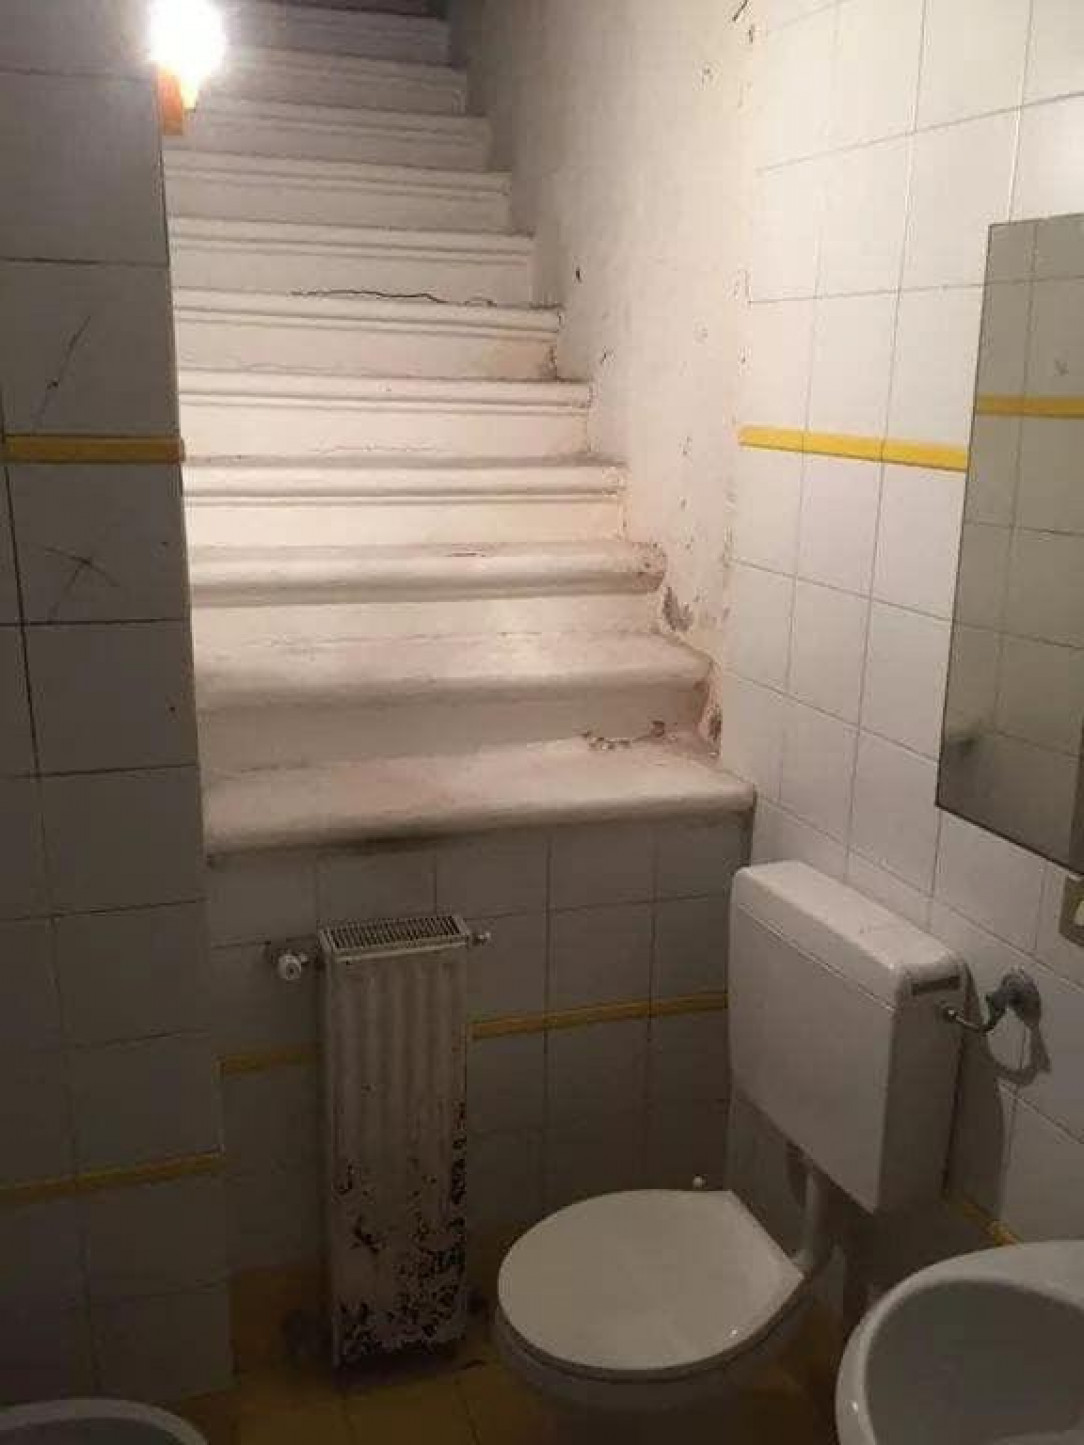 Stairs by toilet